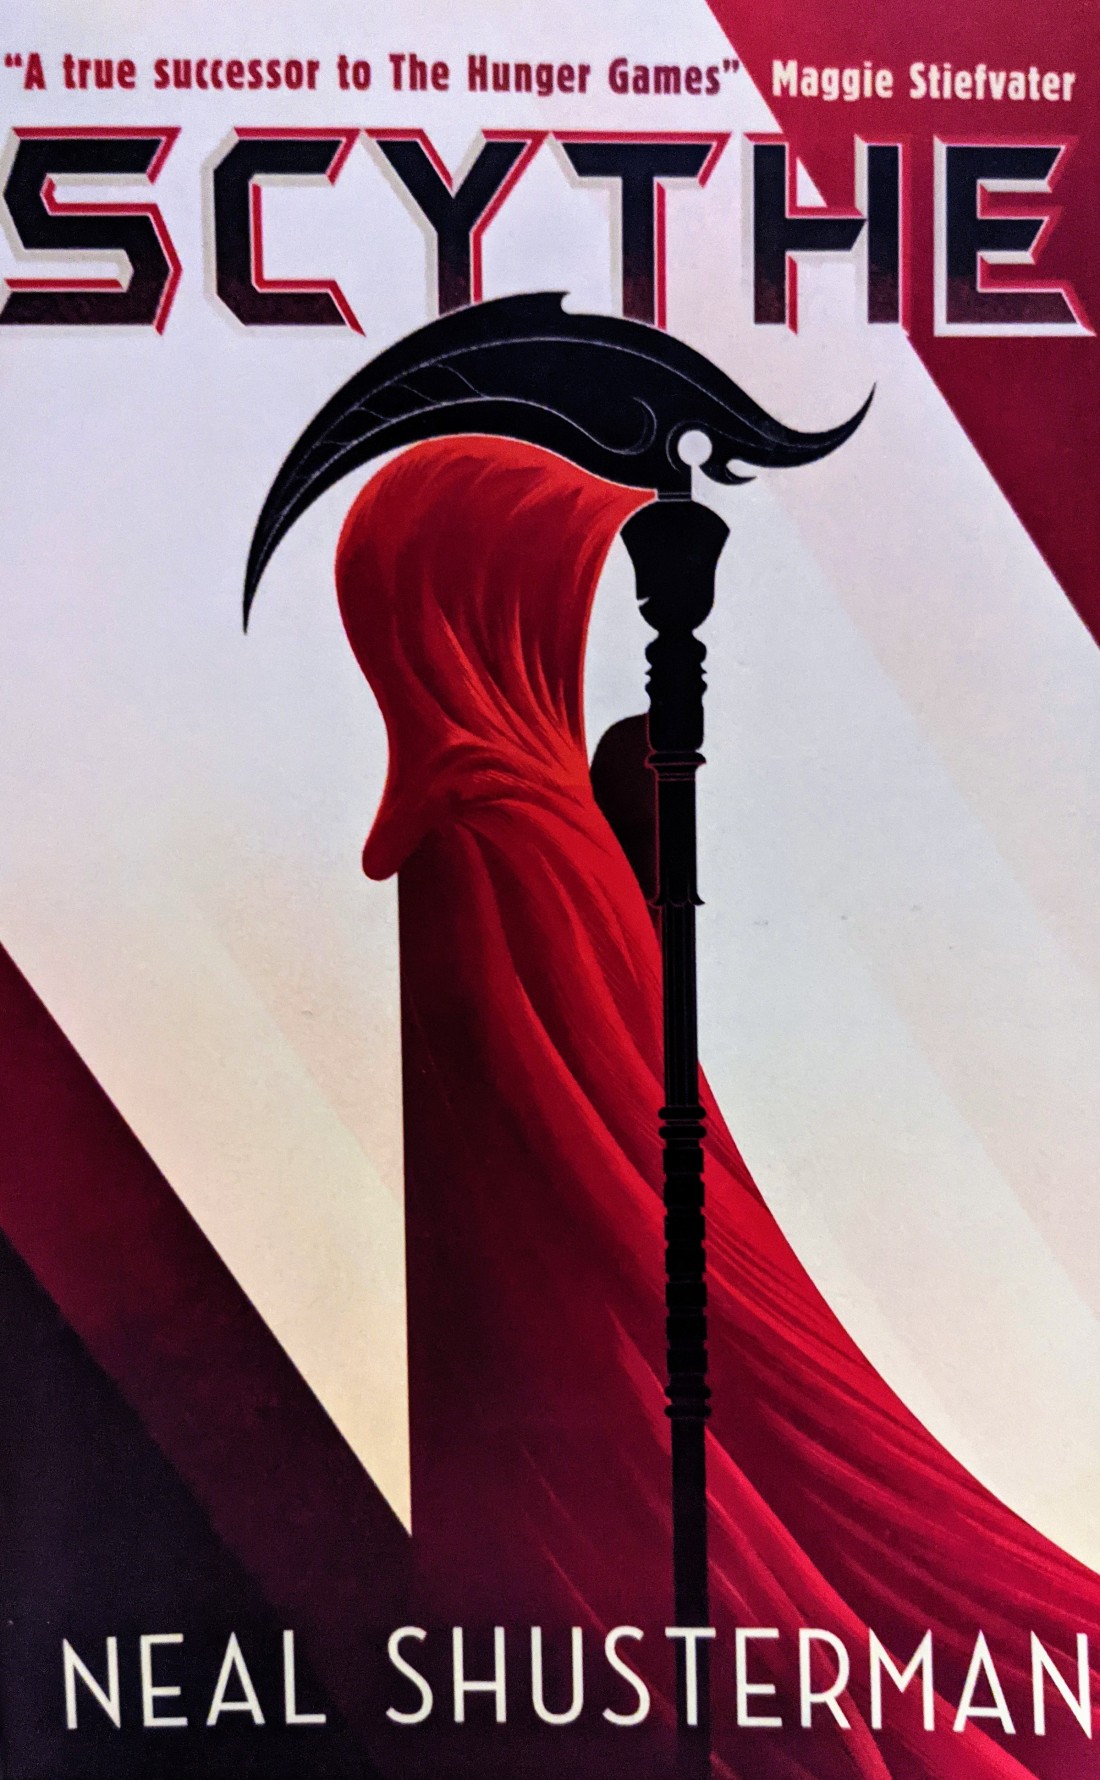 Scythe cover, showcasing a figure in a red cloak holding a scythe